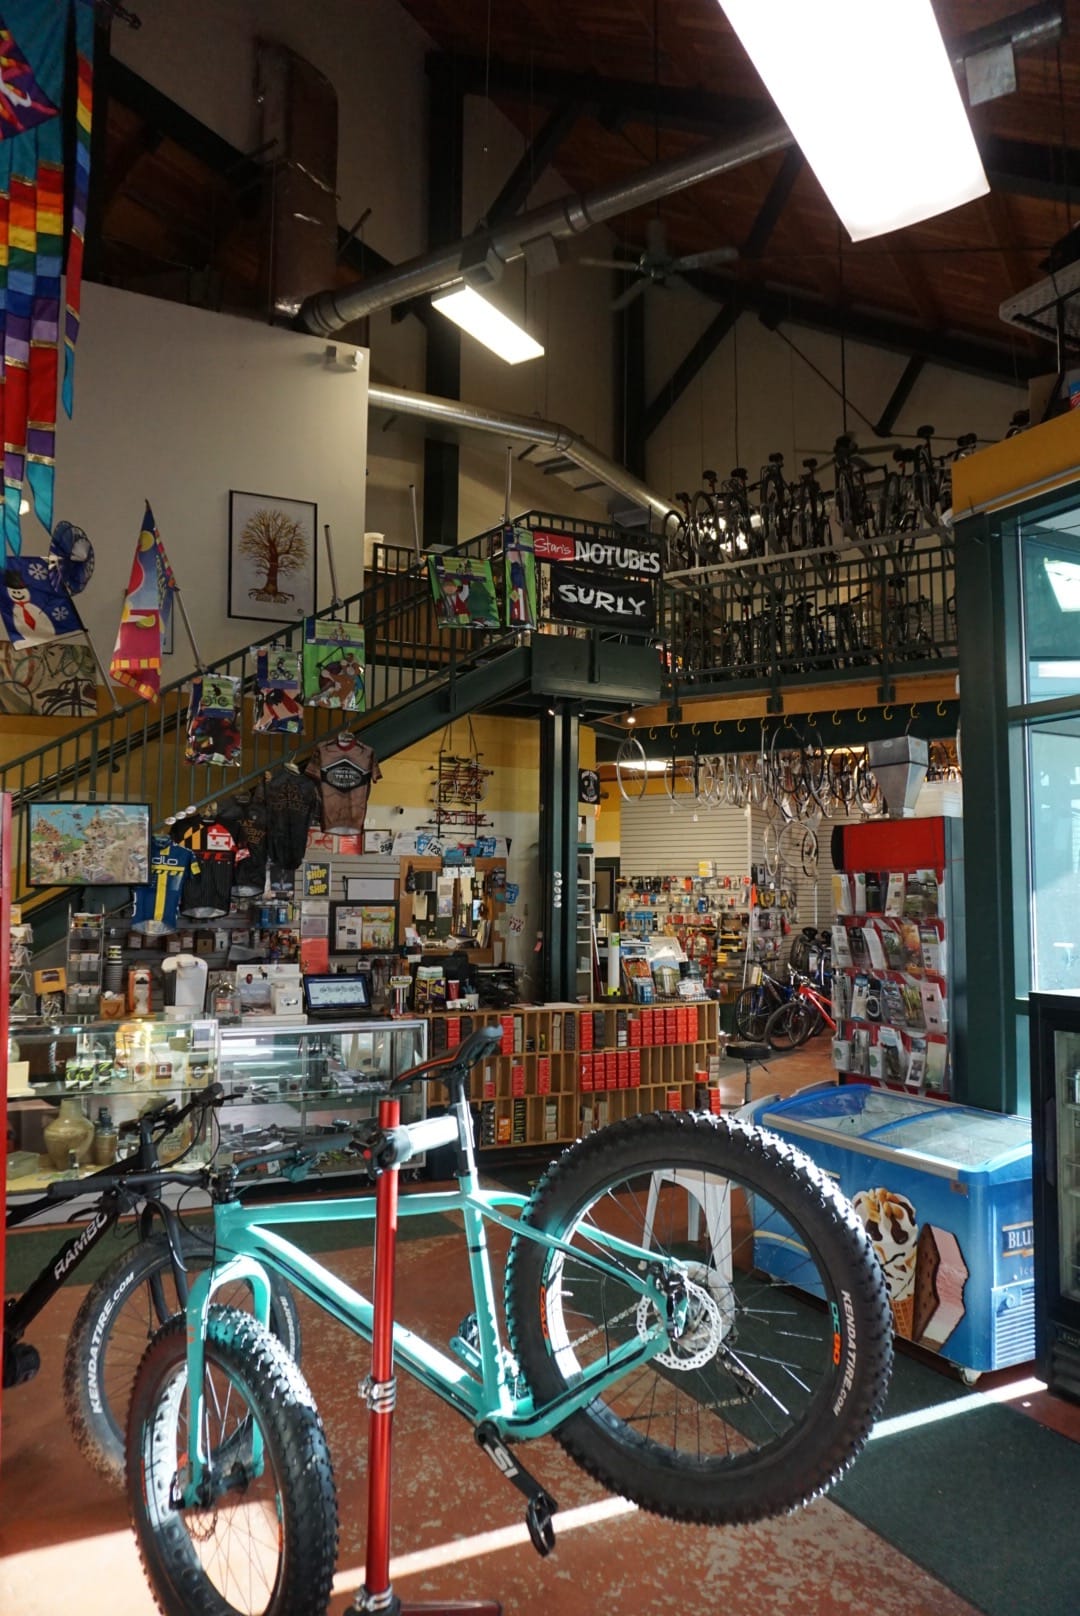 Cumberland Trail Connection, US, bicycle shops near my location